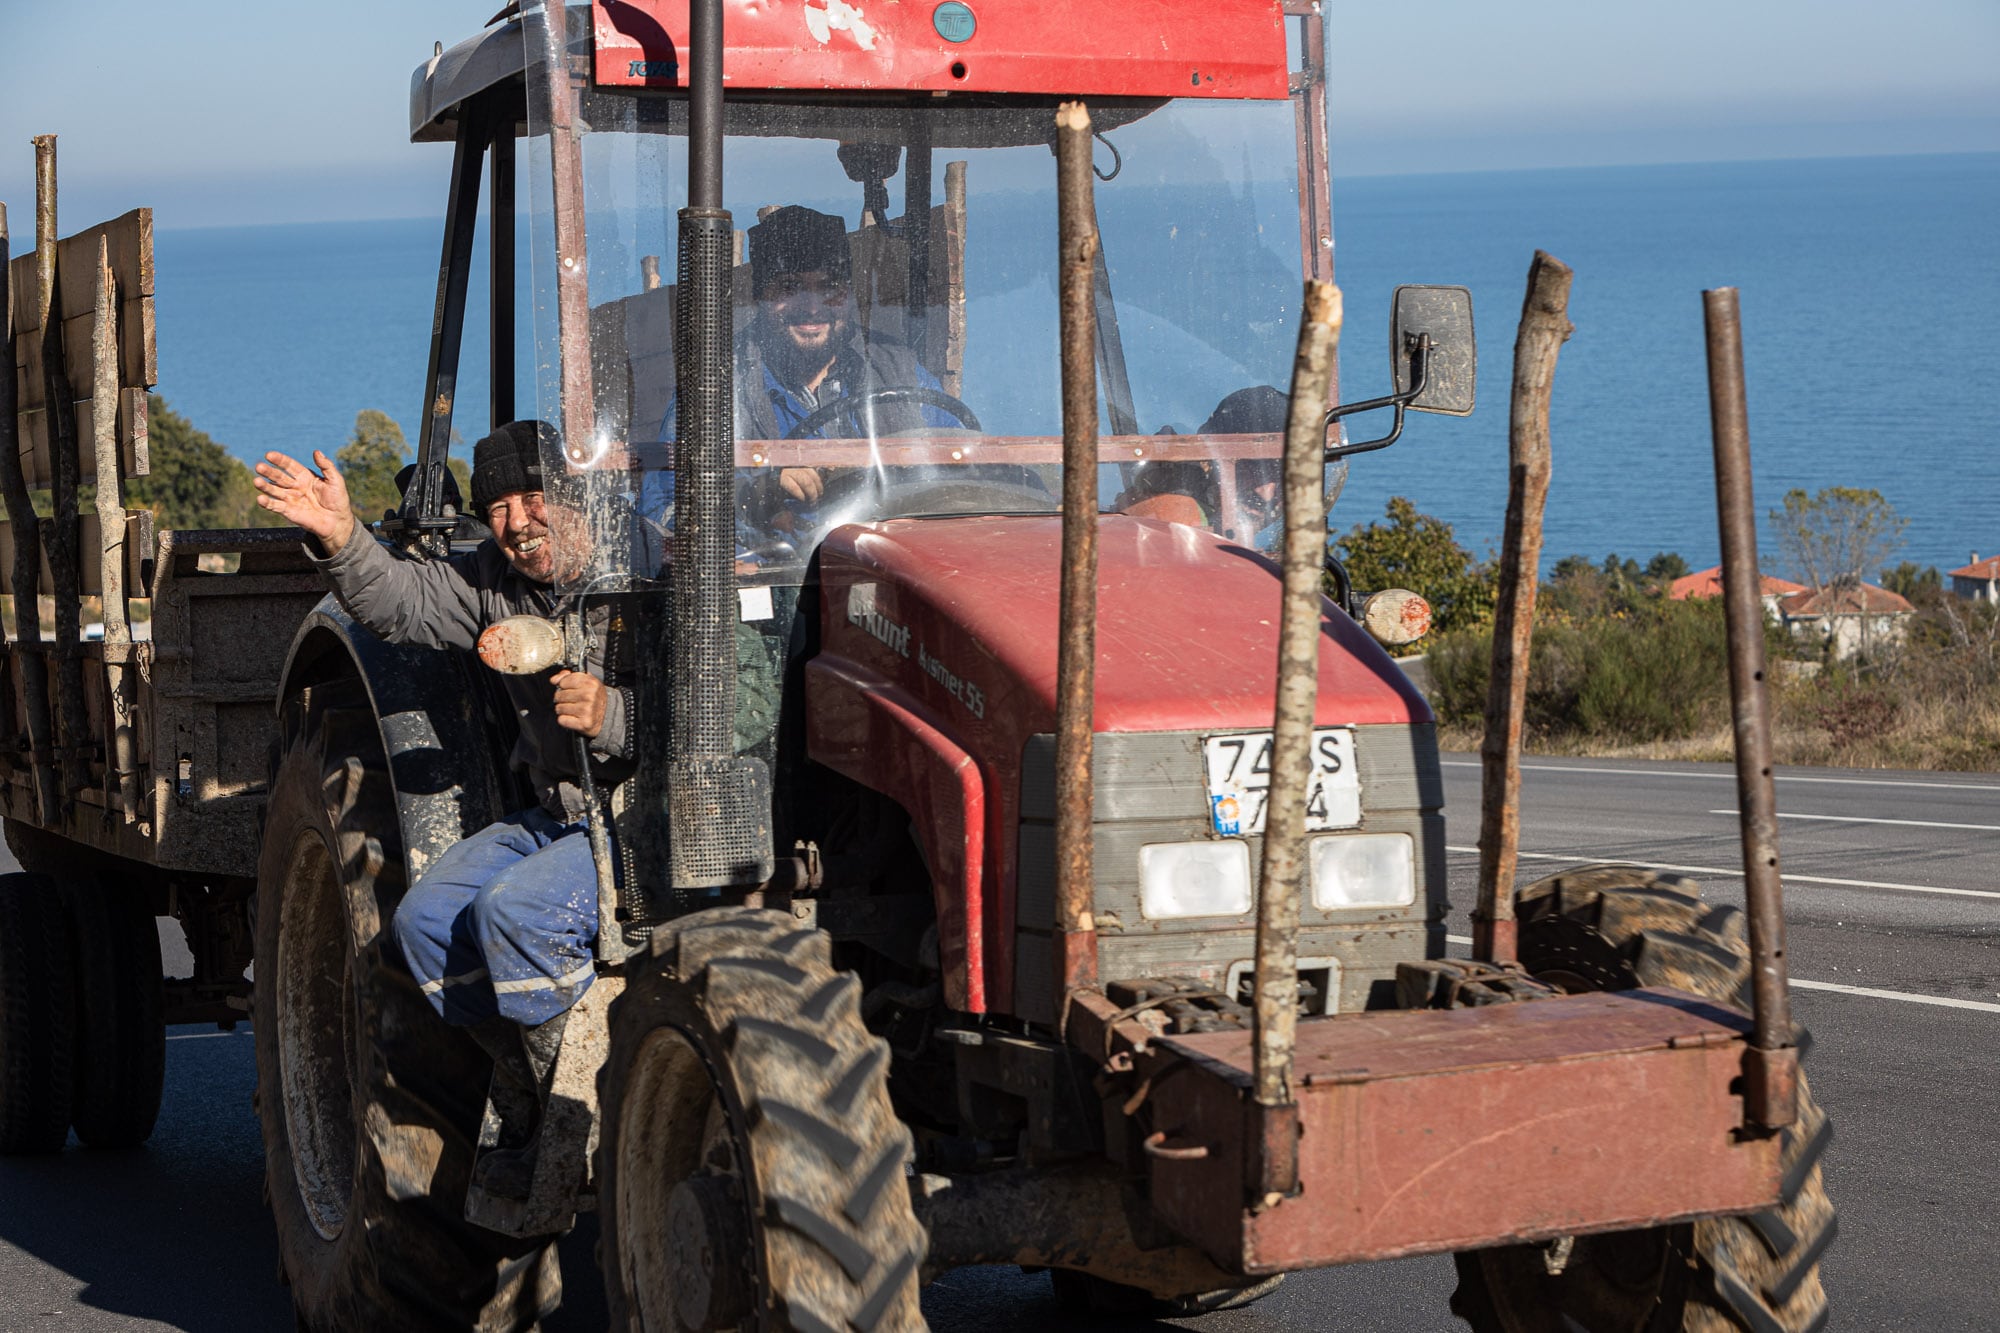 tractorists on the way from Cakraz to Amasra